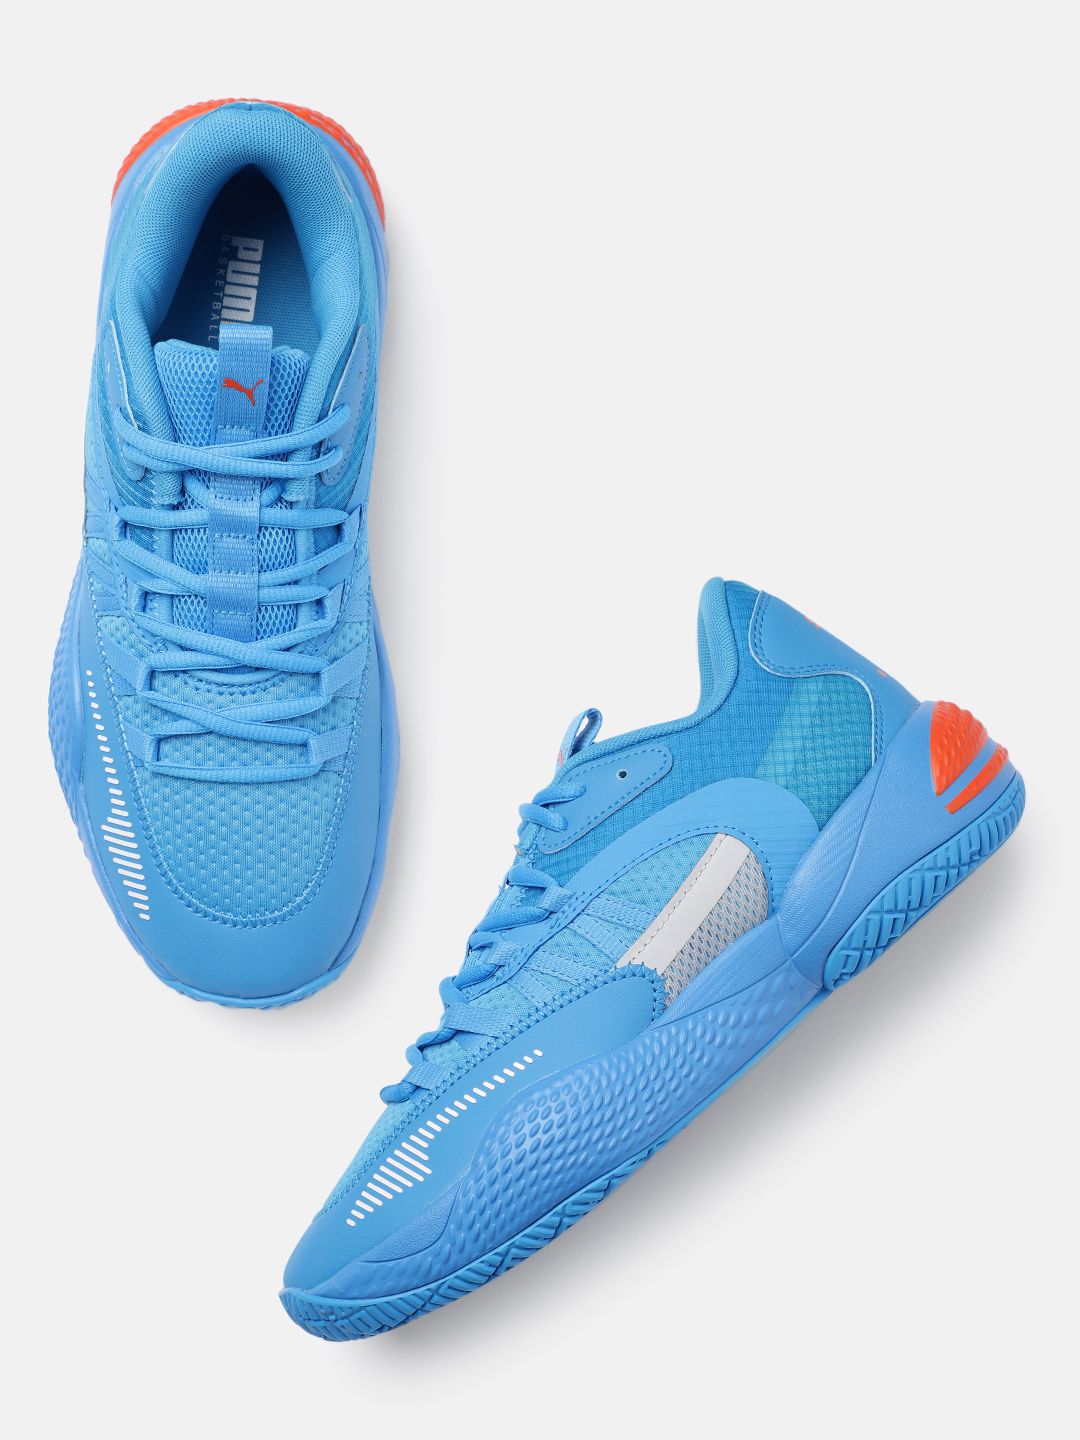 PUMA Hoops Unisex Blue Court Rider 2.0 Basketball Shoes Price in India